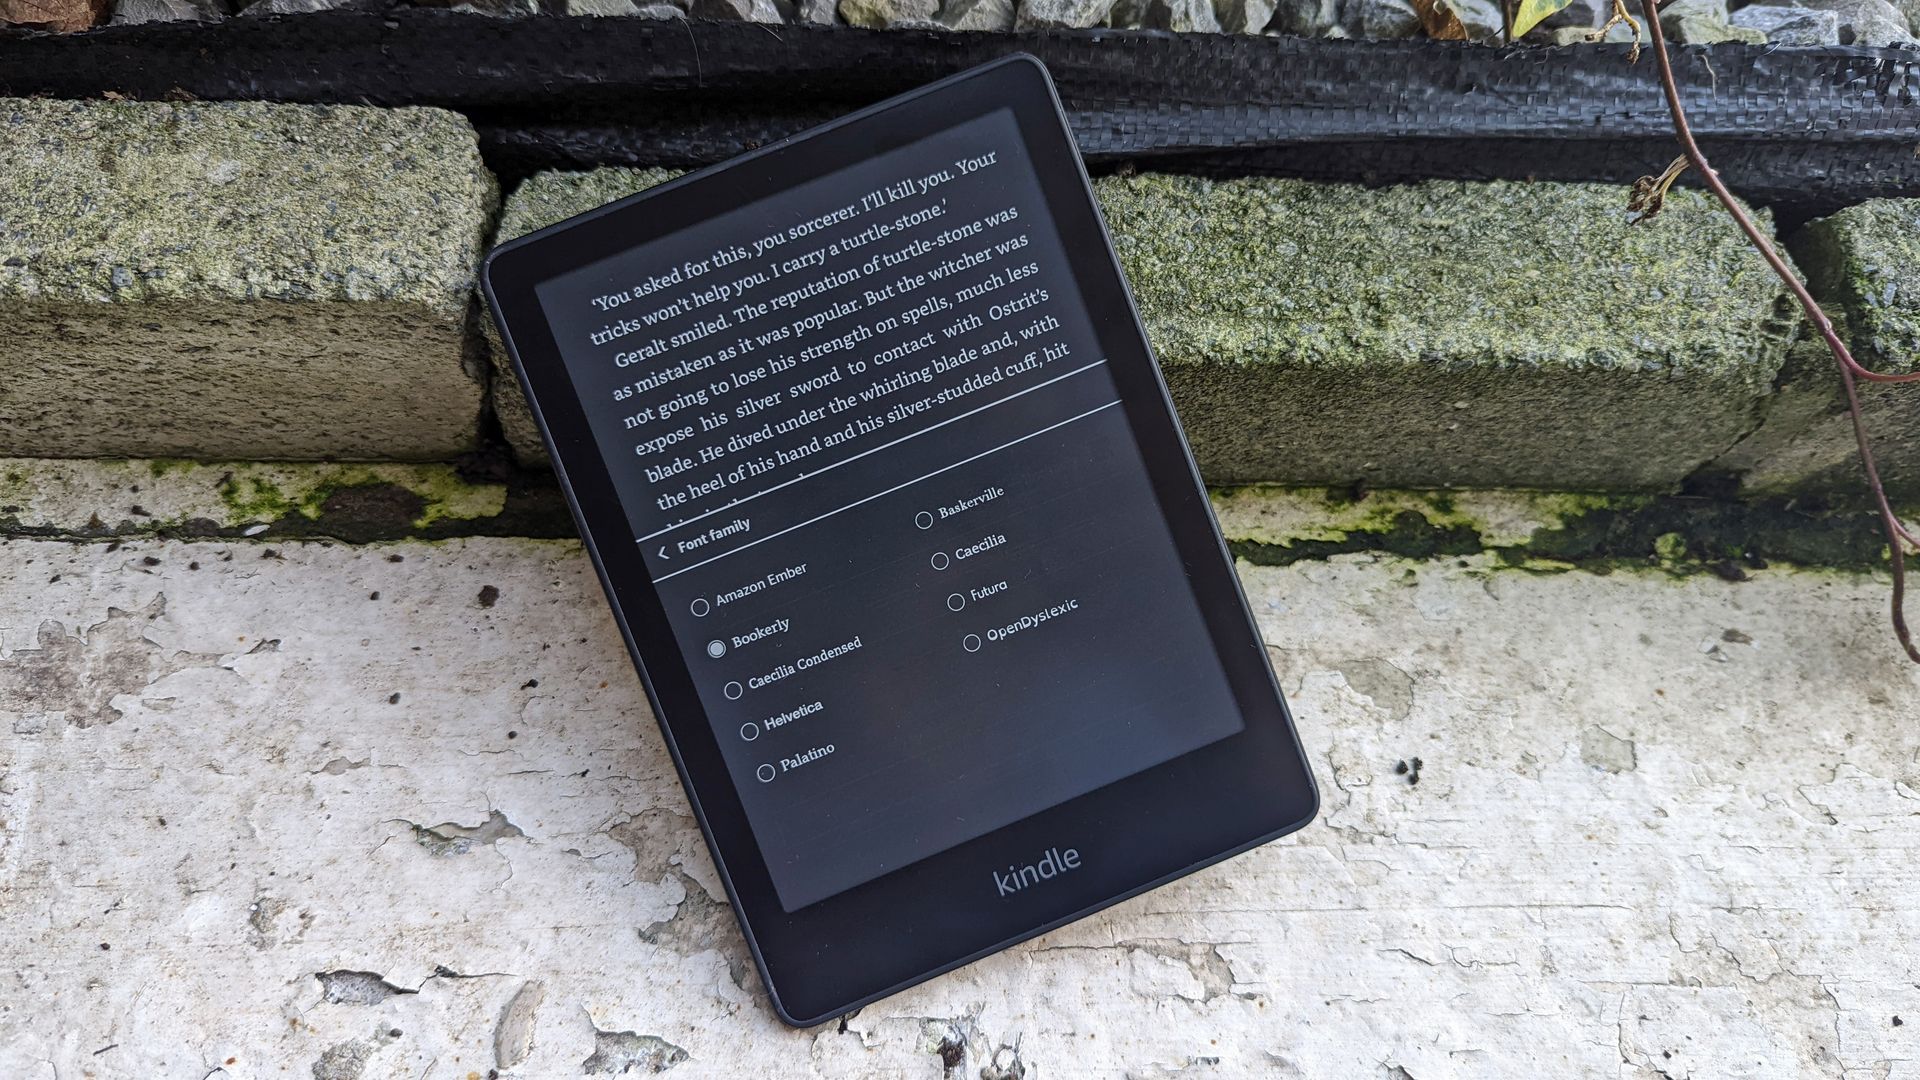 This secret new Kindle Paperwhite model could be the best ereader on